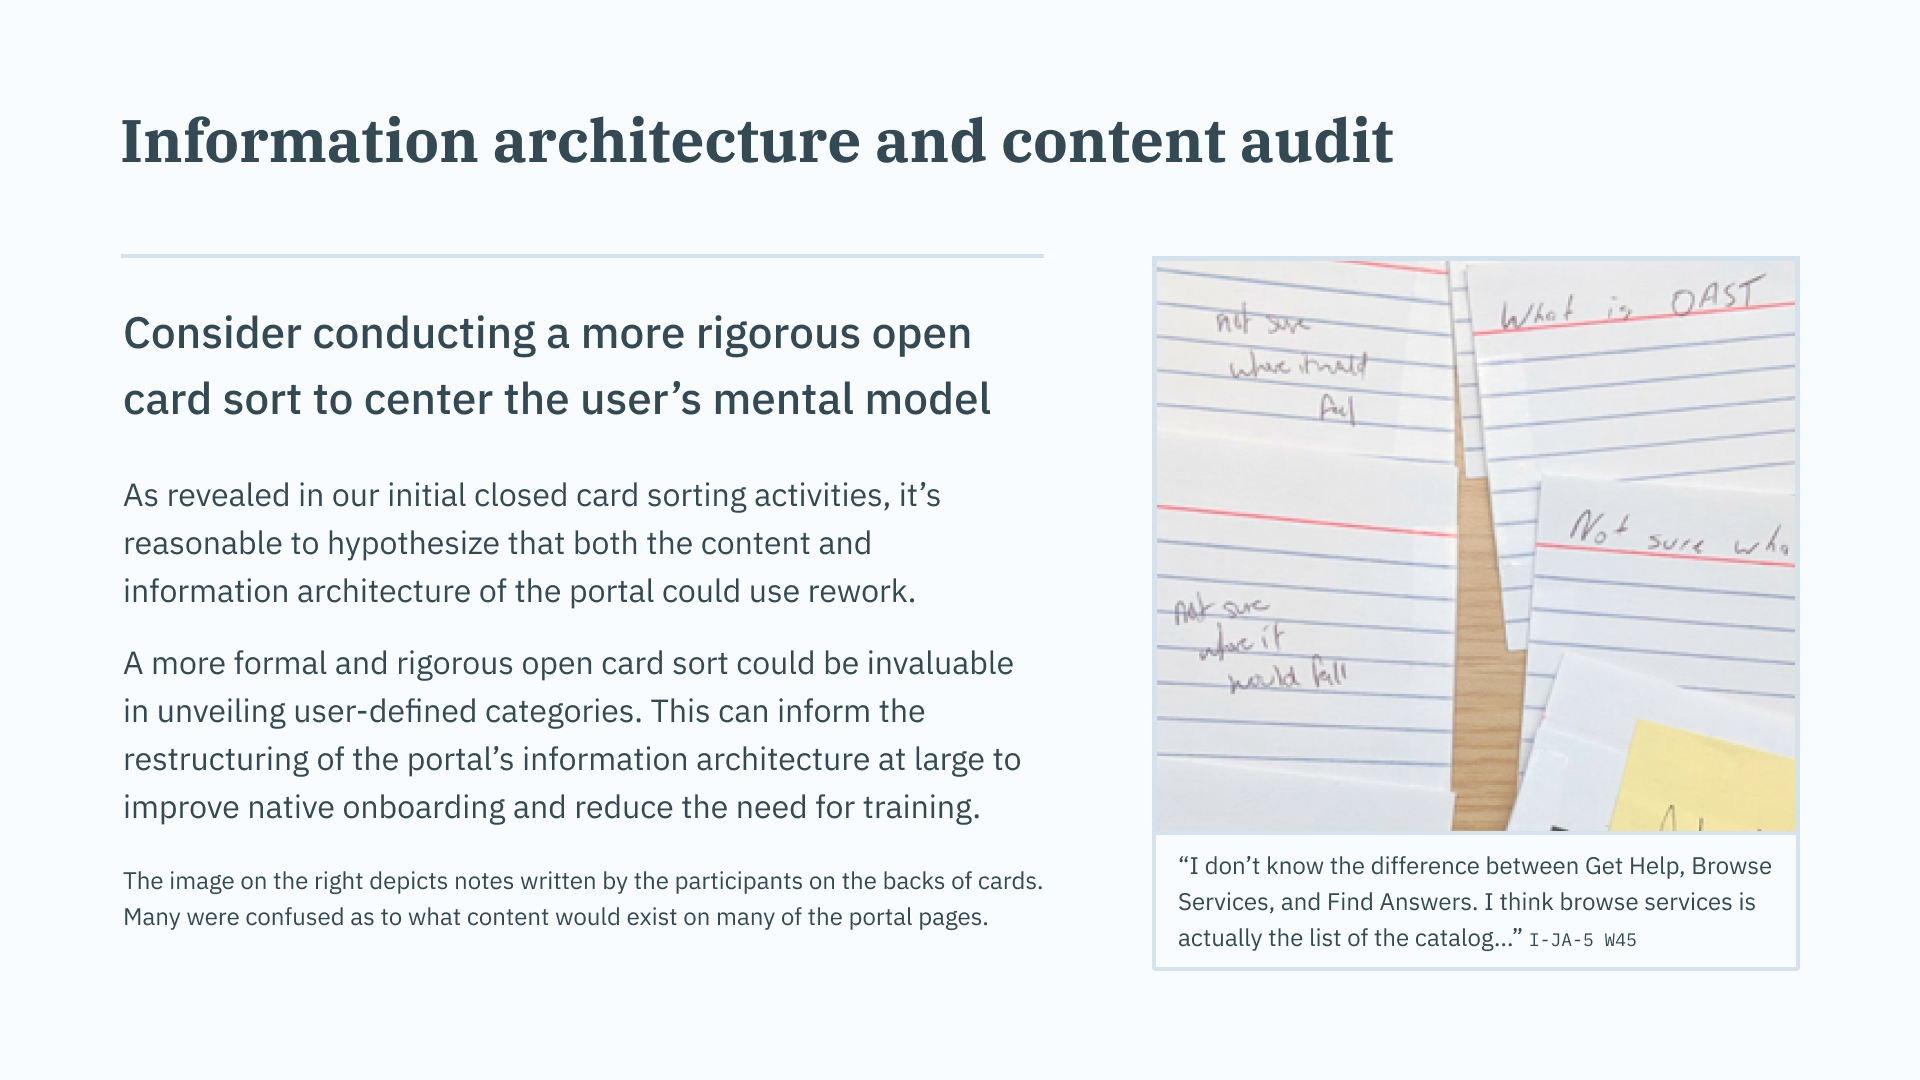 Two pages from my research report: Additional research needs and IA & Content Audit.